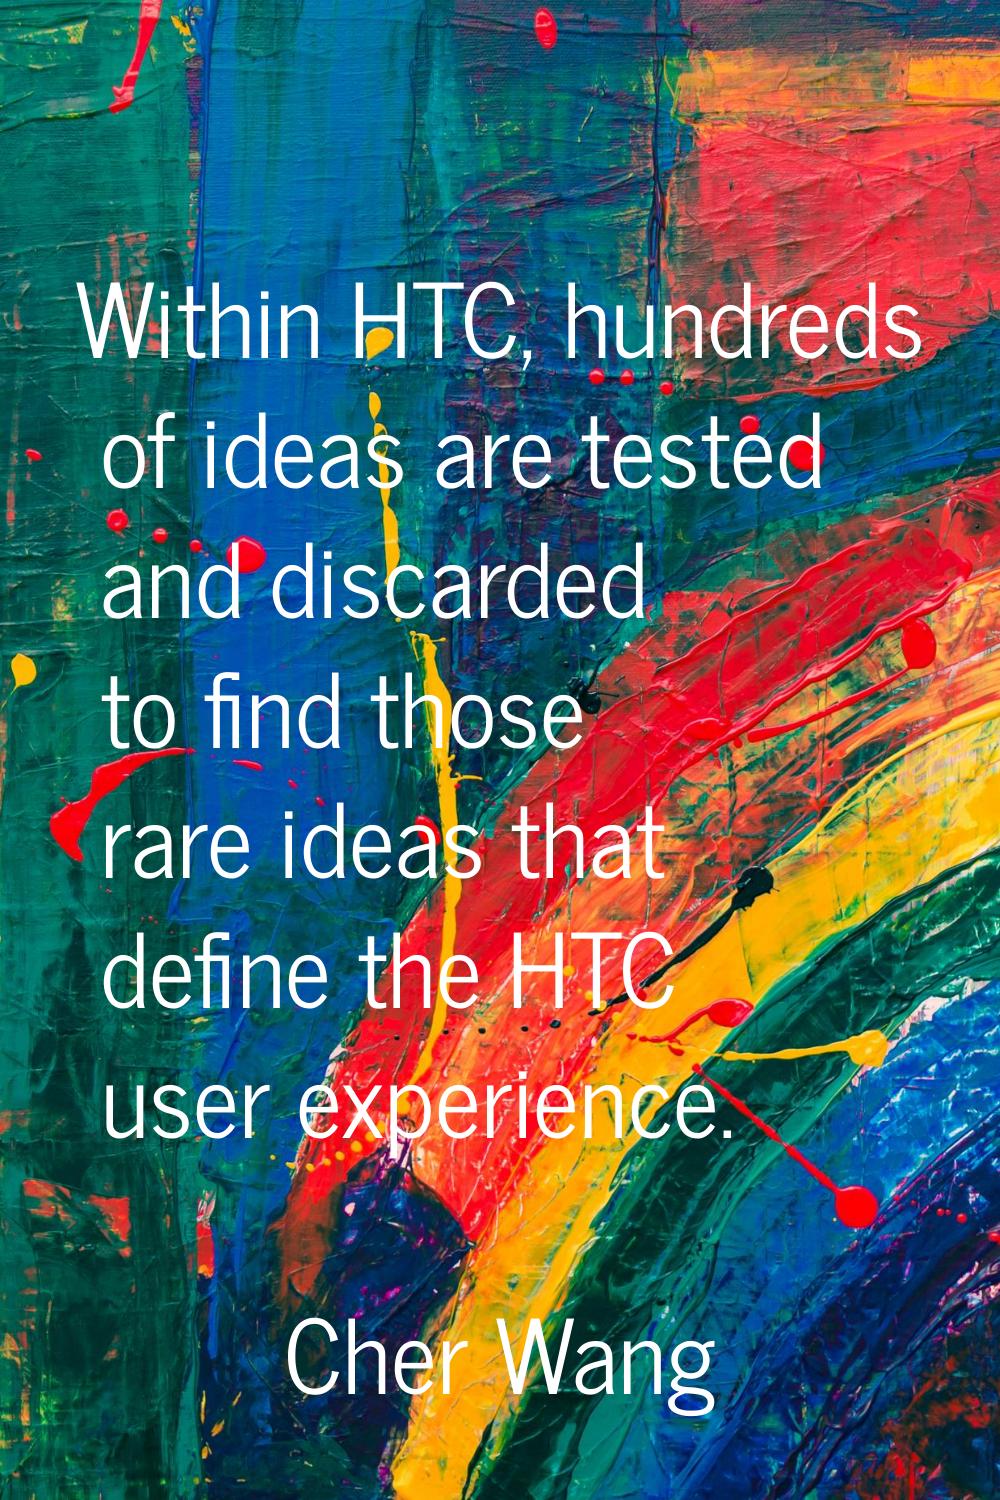 Within HTC, hundreds of ideas are tested and discarded to find those rare ideas that define the HTC